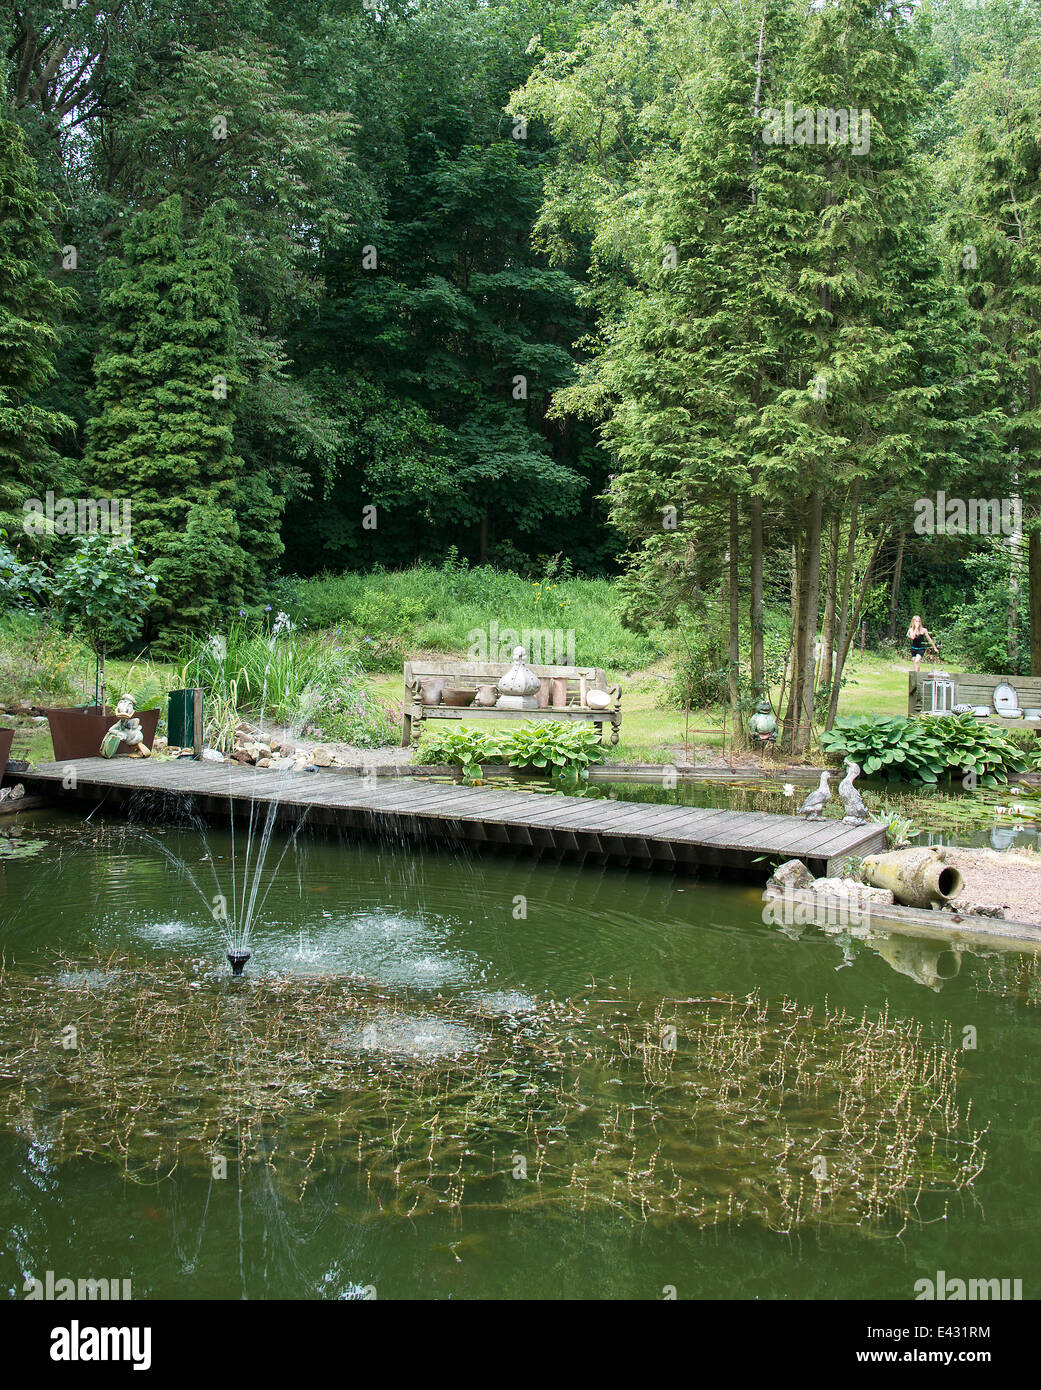 english garden with pond water bridge seat and old vases Stock Photo